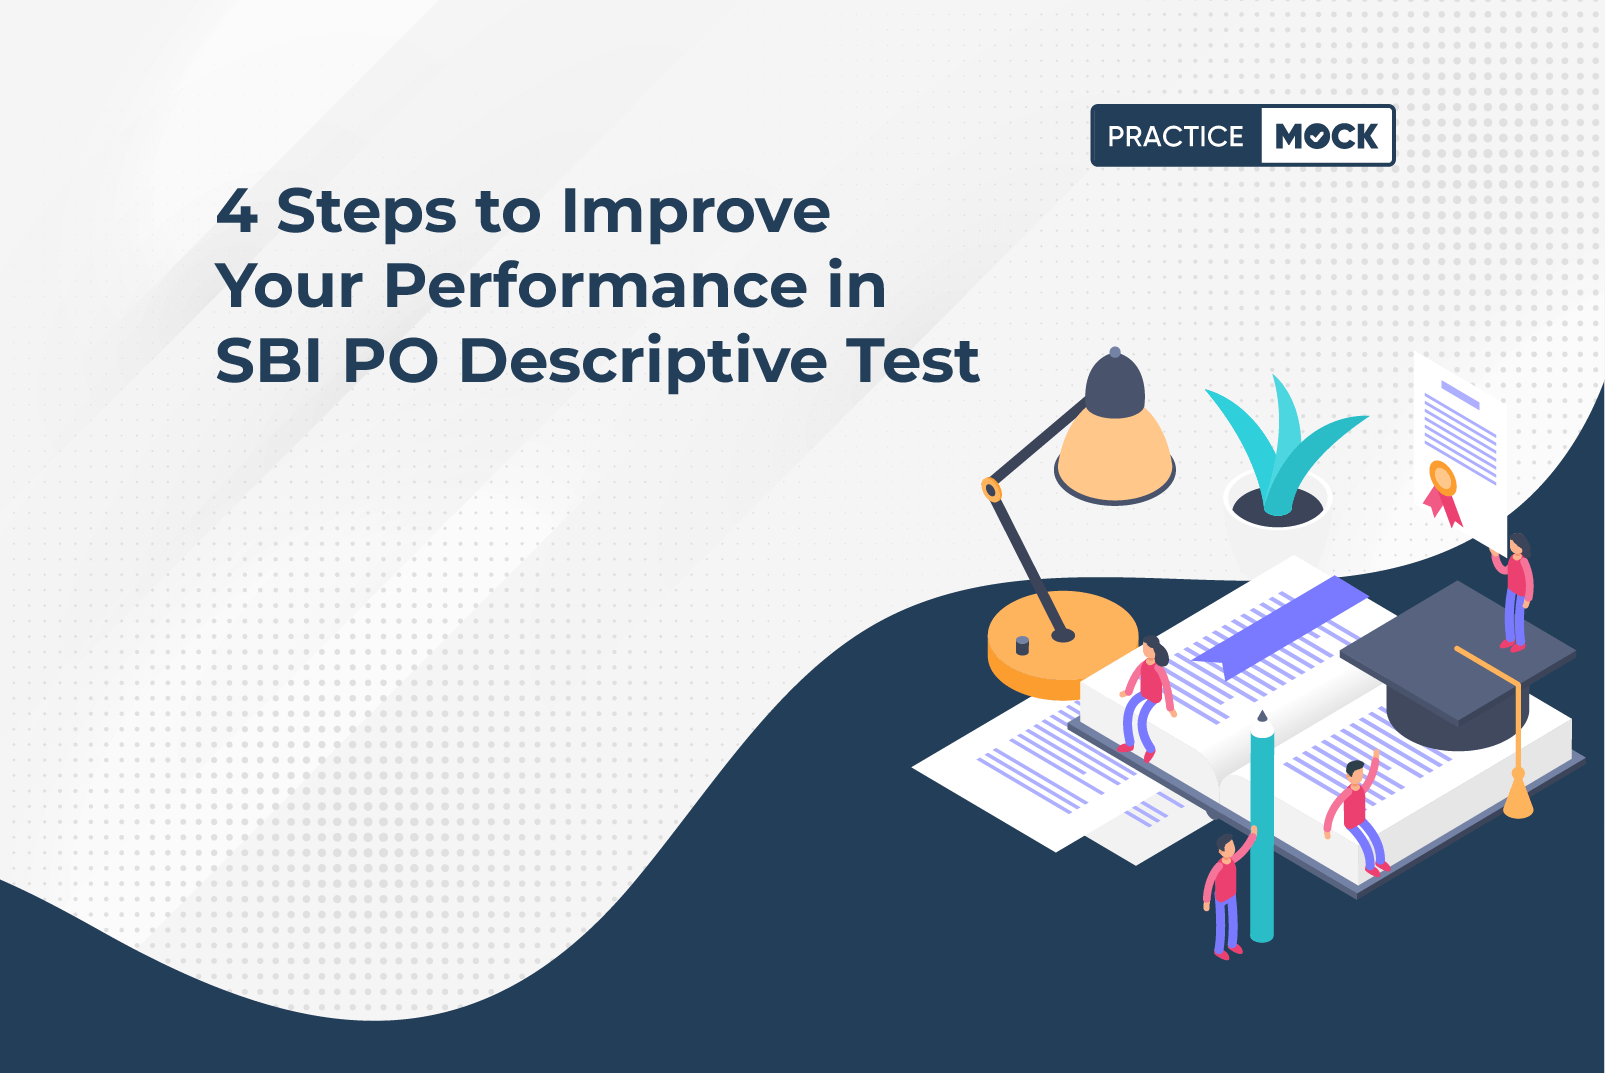 4 Steps to Improve Your Performance in SBI PO Descriptive Test (1)